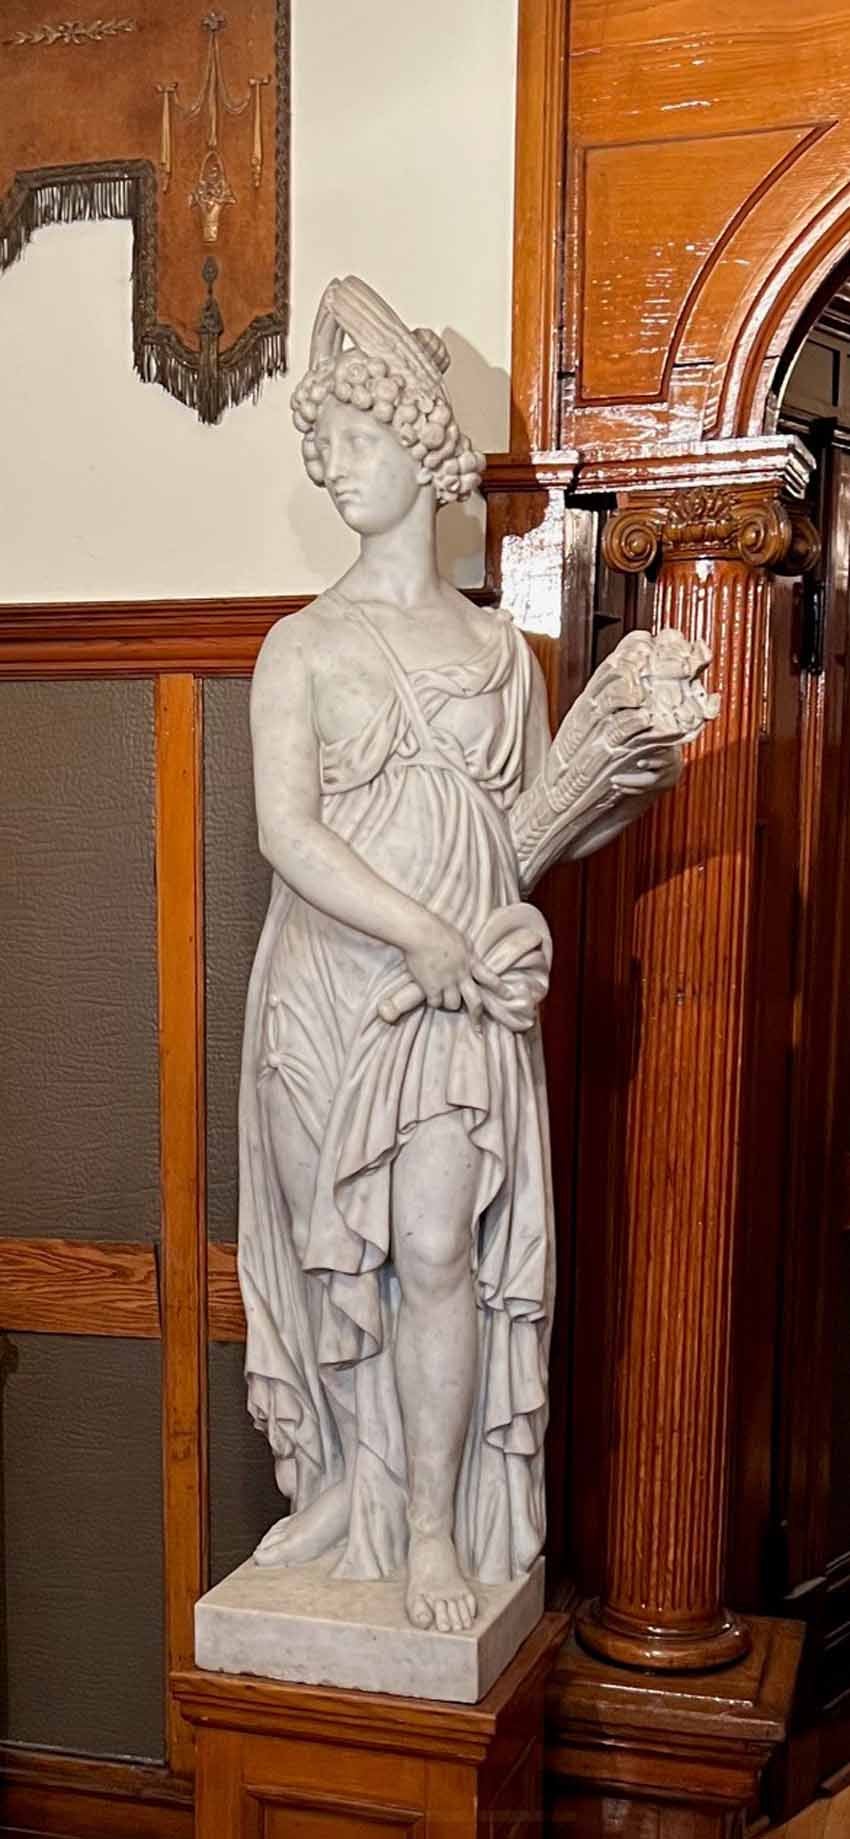 Near life-sized antique Italian white marble figure of CERES, 19th century,
Ceres, known to the Greeks as Demeter, was a goddess of agriculture, fertility, grains, the harvest, motherhood, the earth, and cultivated crops.
Depicted here standing